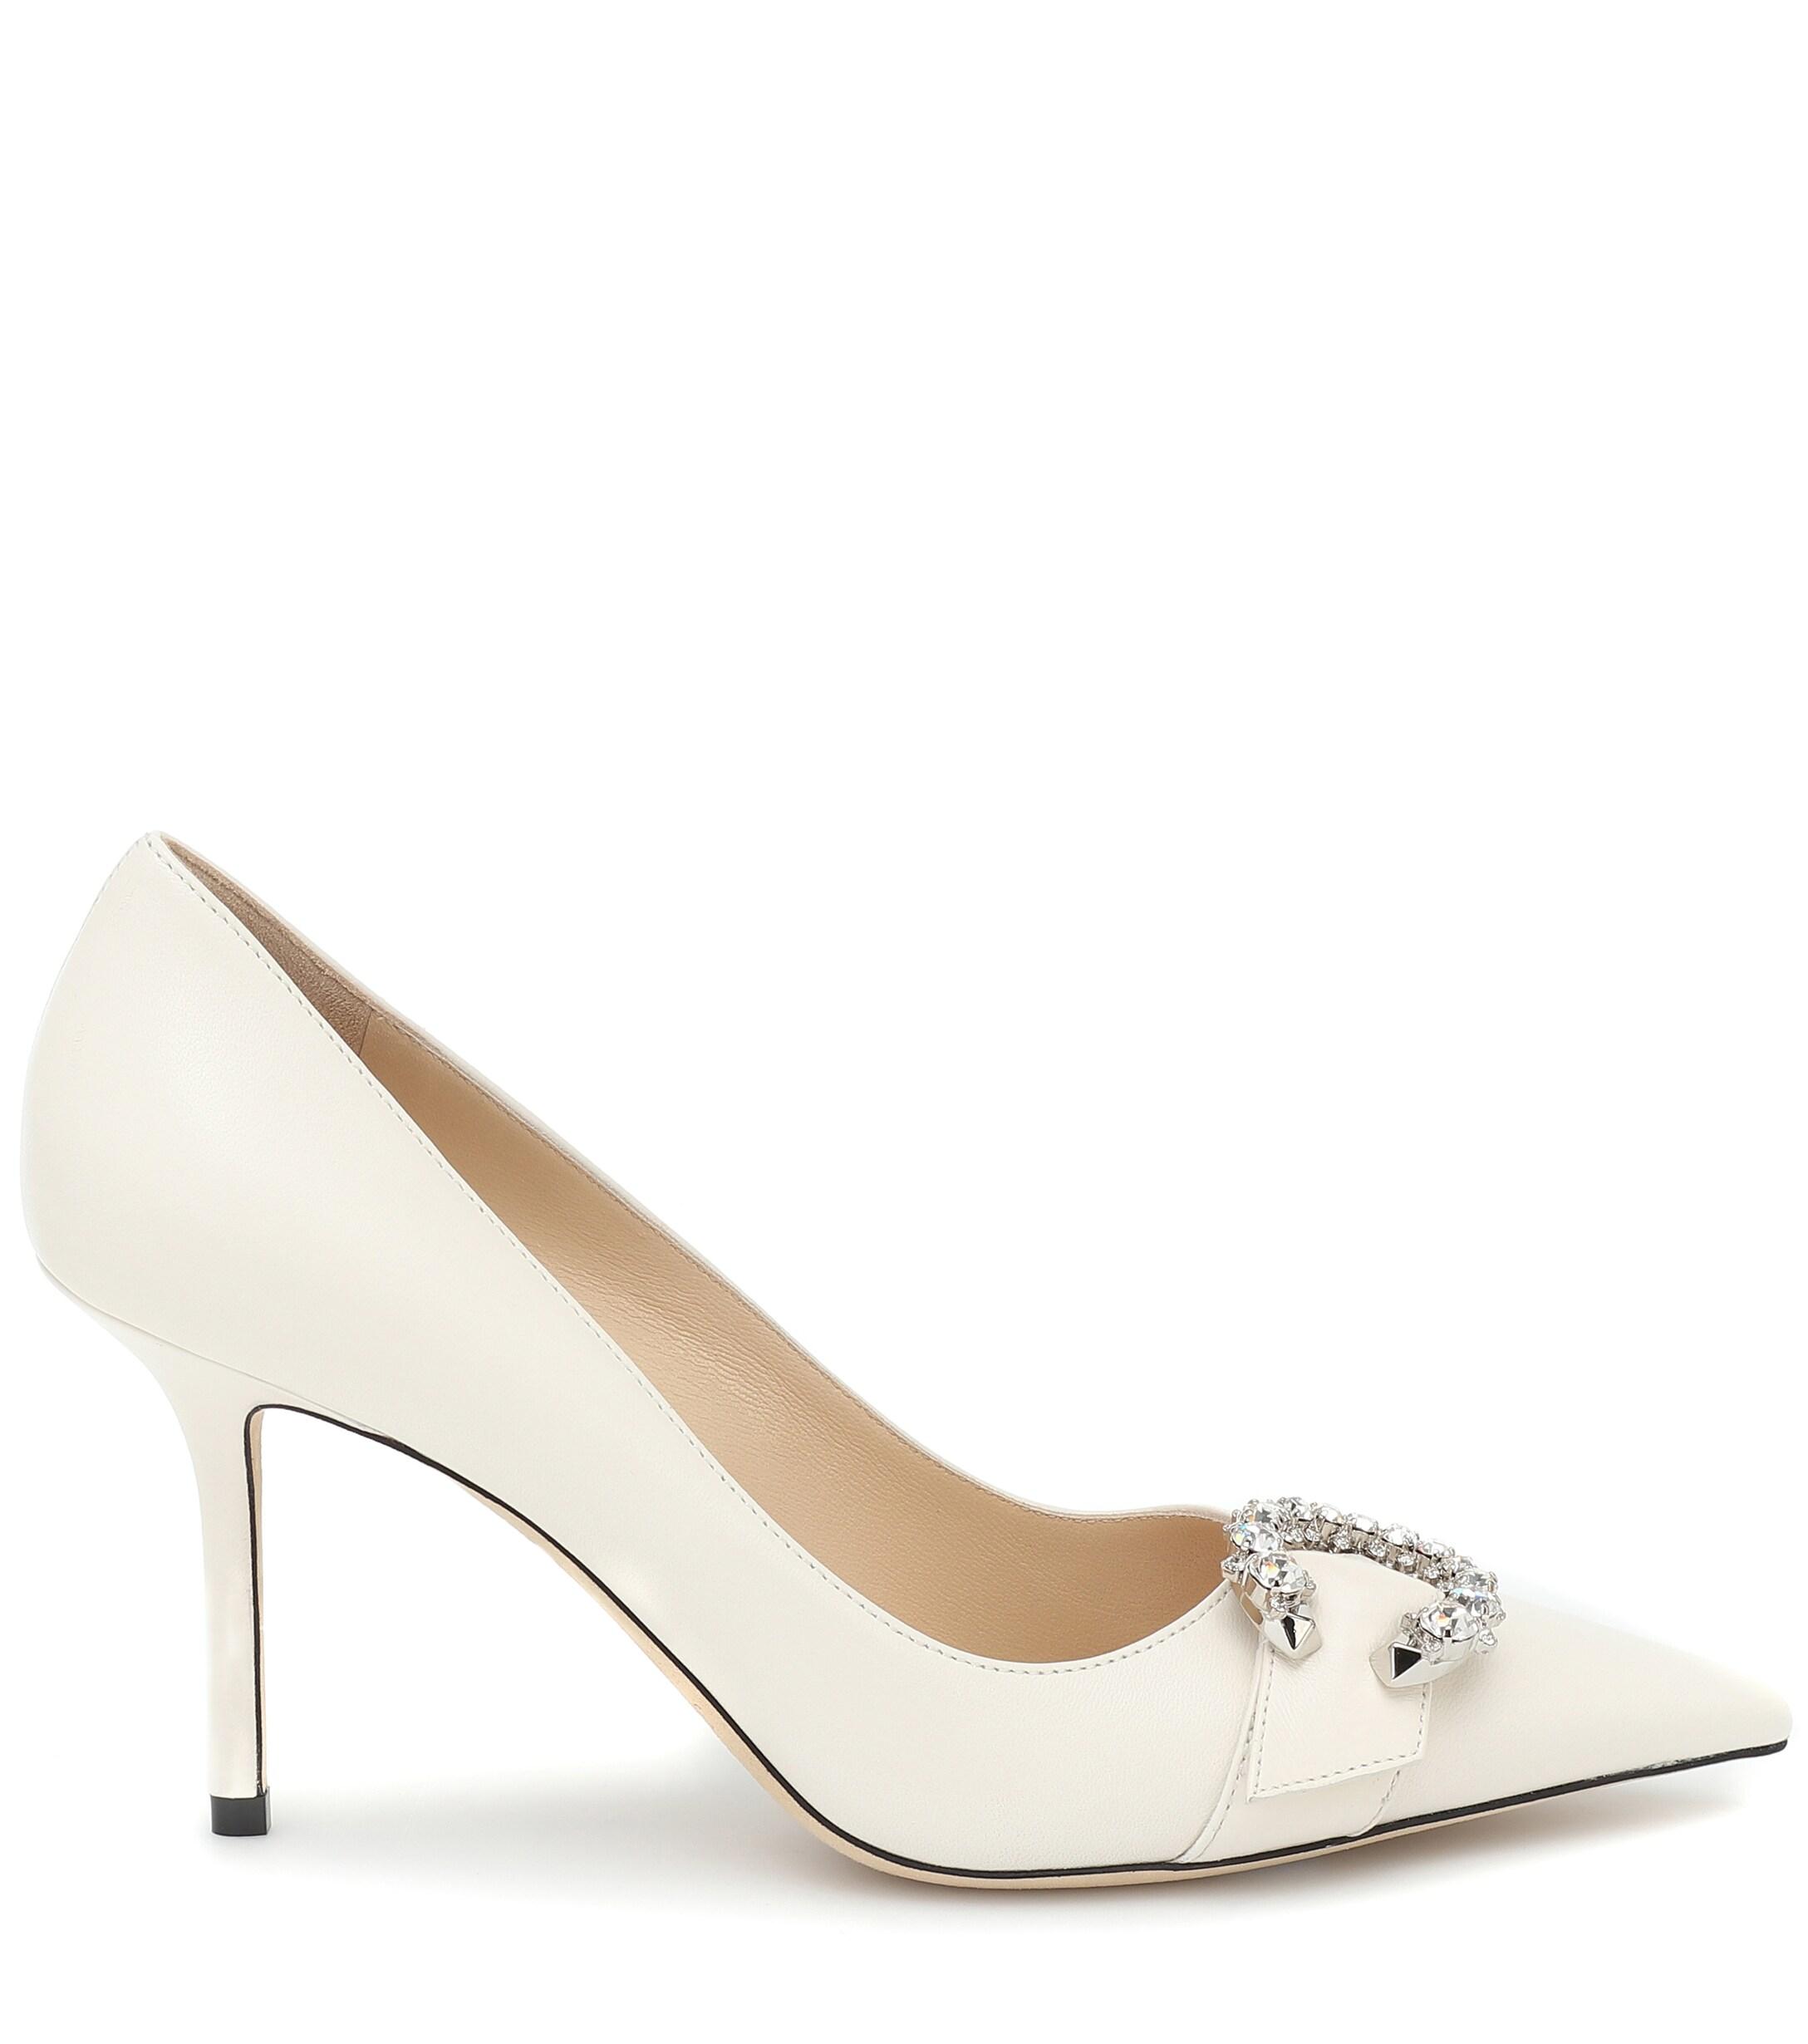 Jimmy Choo Saresa 85 Crystal-embellished Leather Pumps in White - Lyst